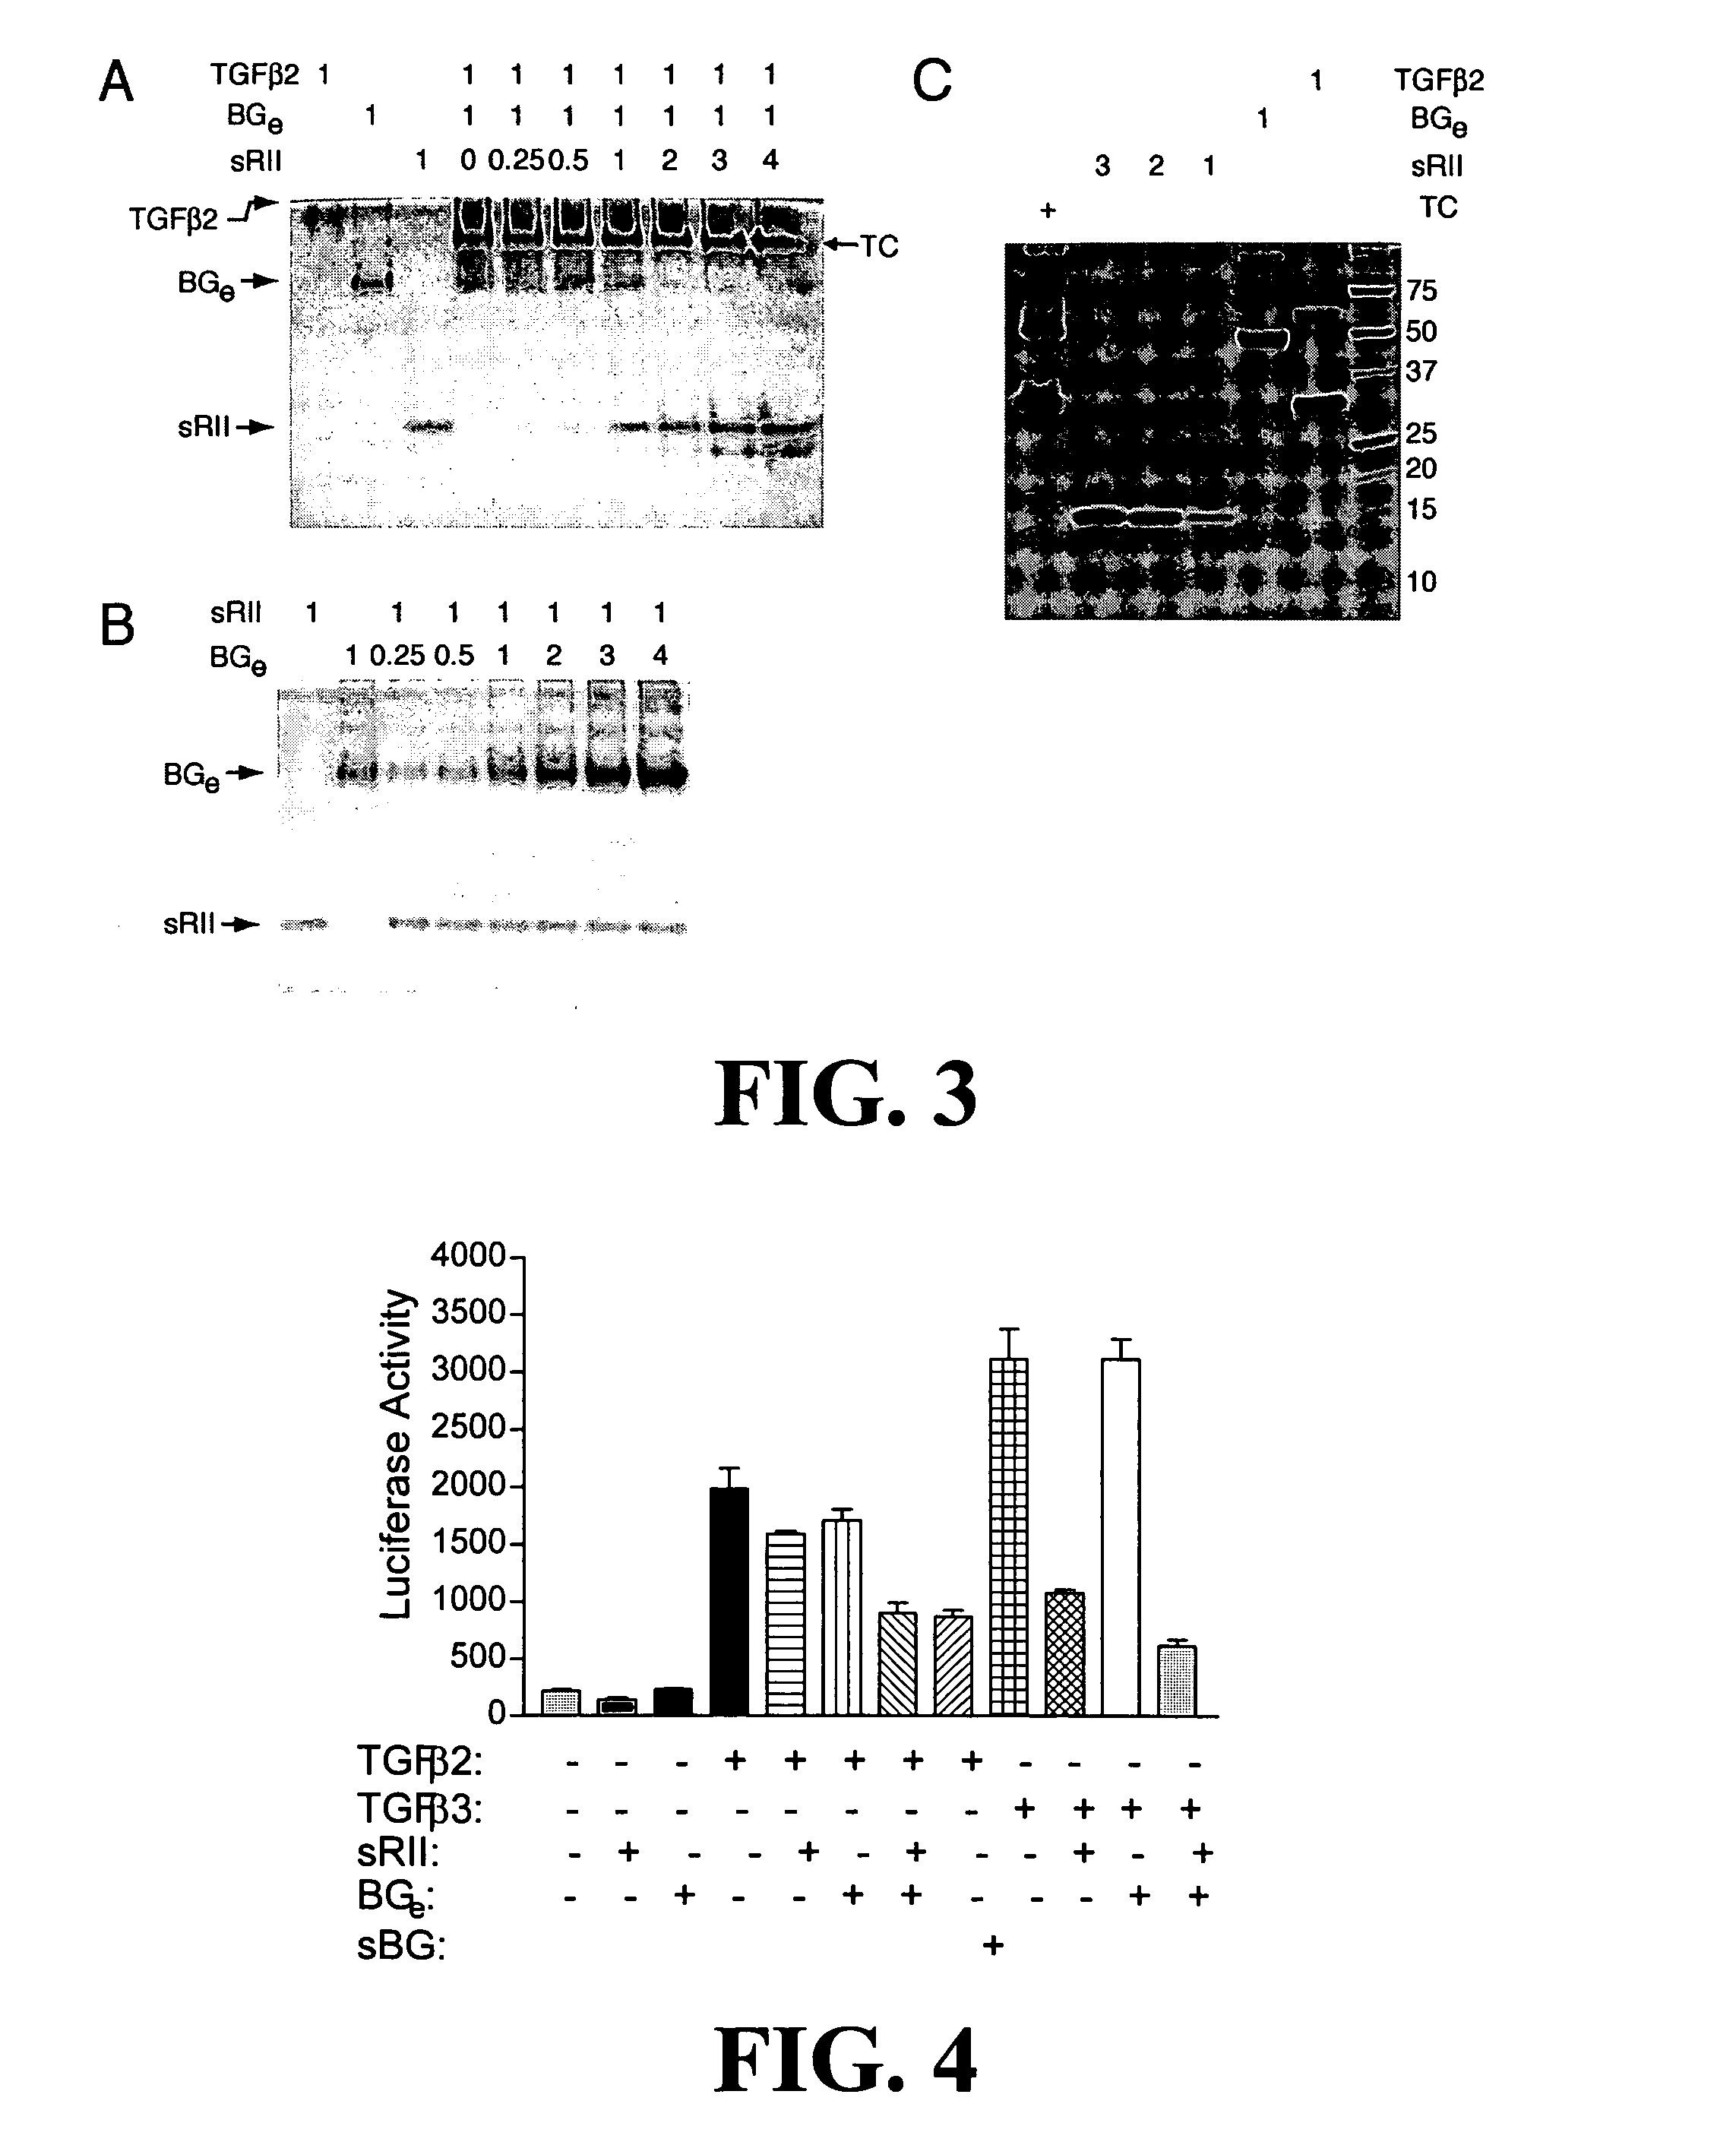 Antagonizing TGF-beta activity with various ectodomains TGF-beta receptors used in combination or as fusion proteins